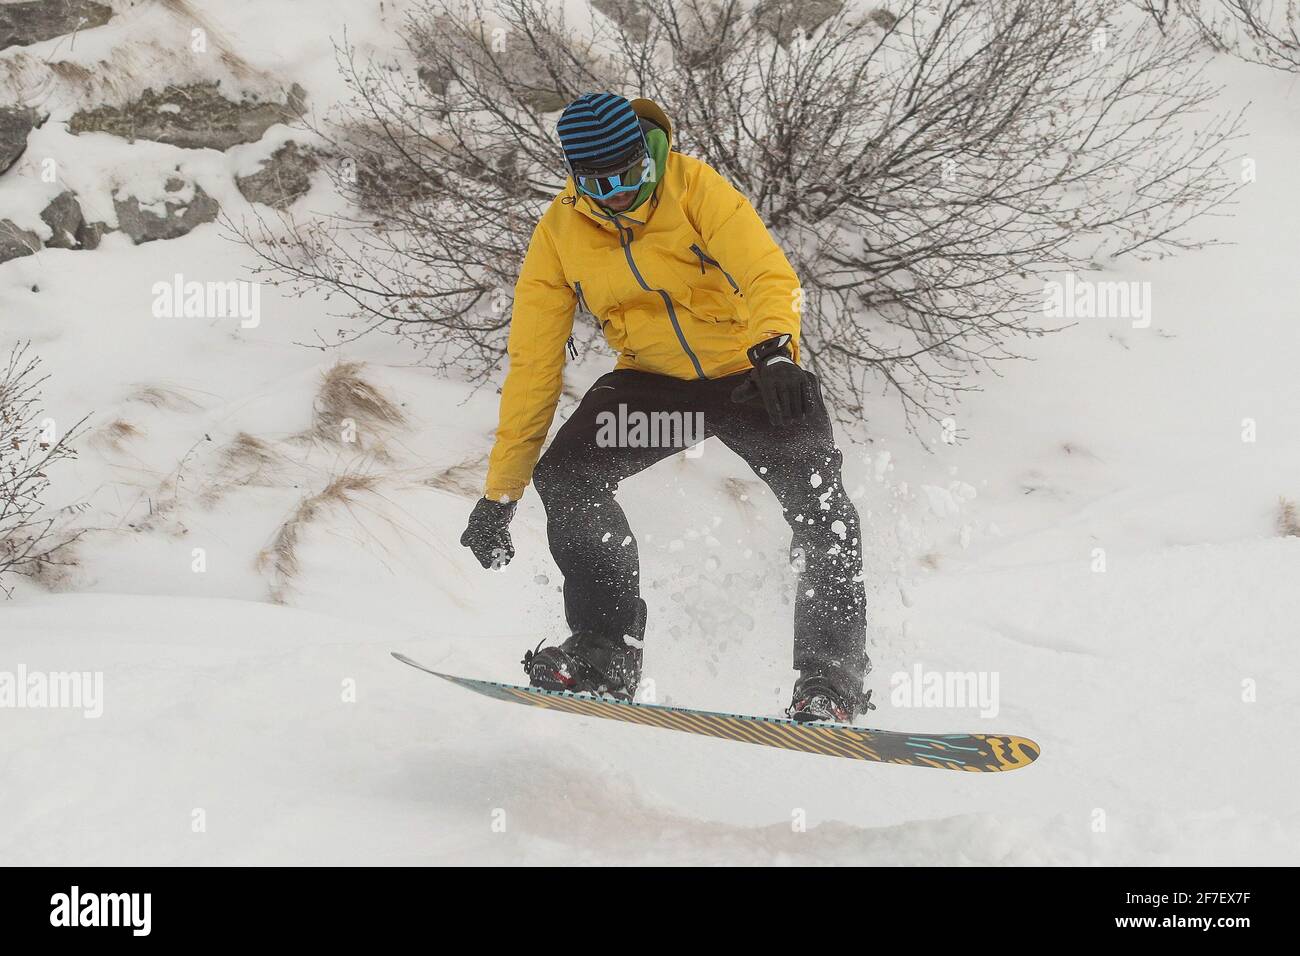 A snowboarder in snow going downhill amd jumping. Boarder with yellow clothing with black trousers and orange board riding and jumping over snow on a Stock Photo